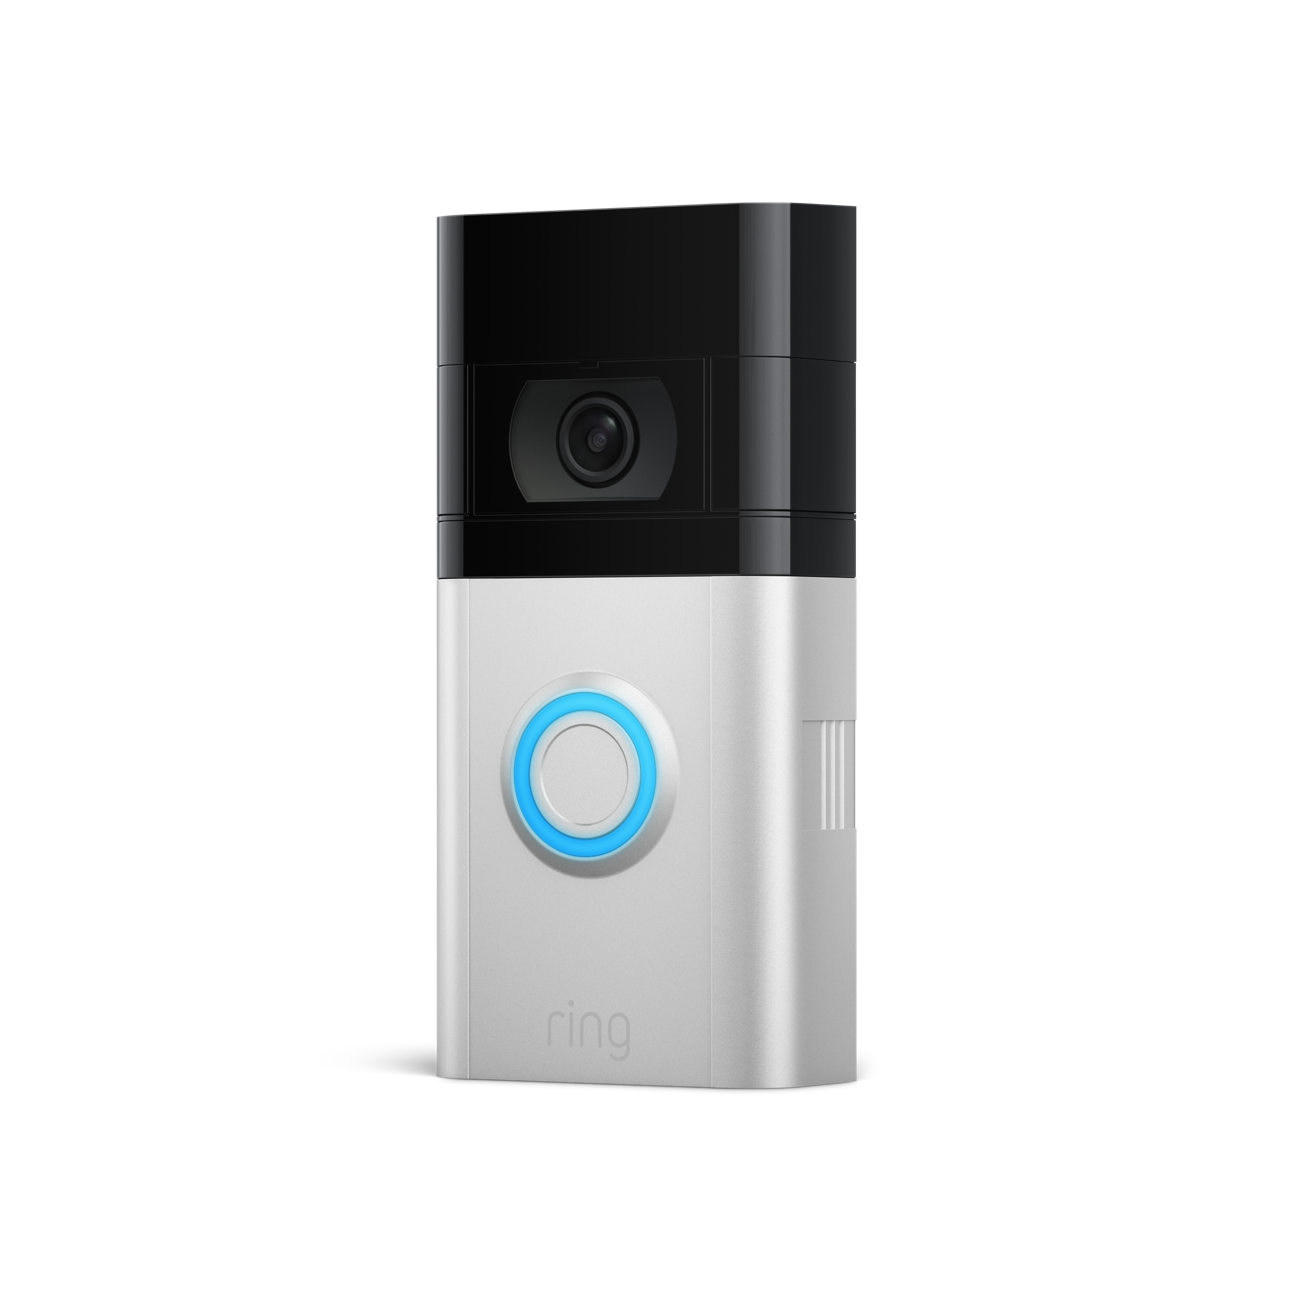 Ring Smart Video Doorbell 3 Plus with Built-in Wi-Fi & Camera - Refurbished Pristine